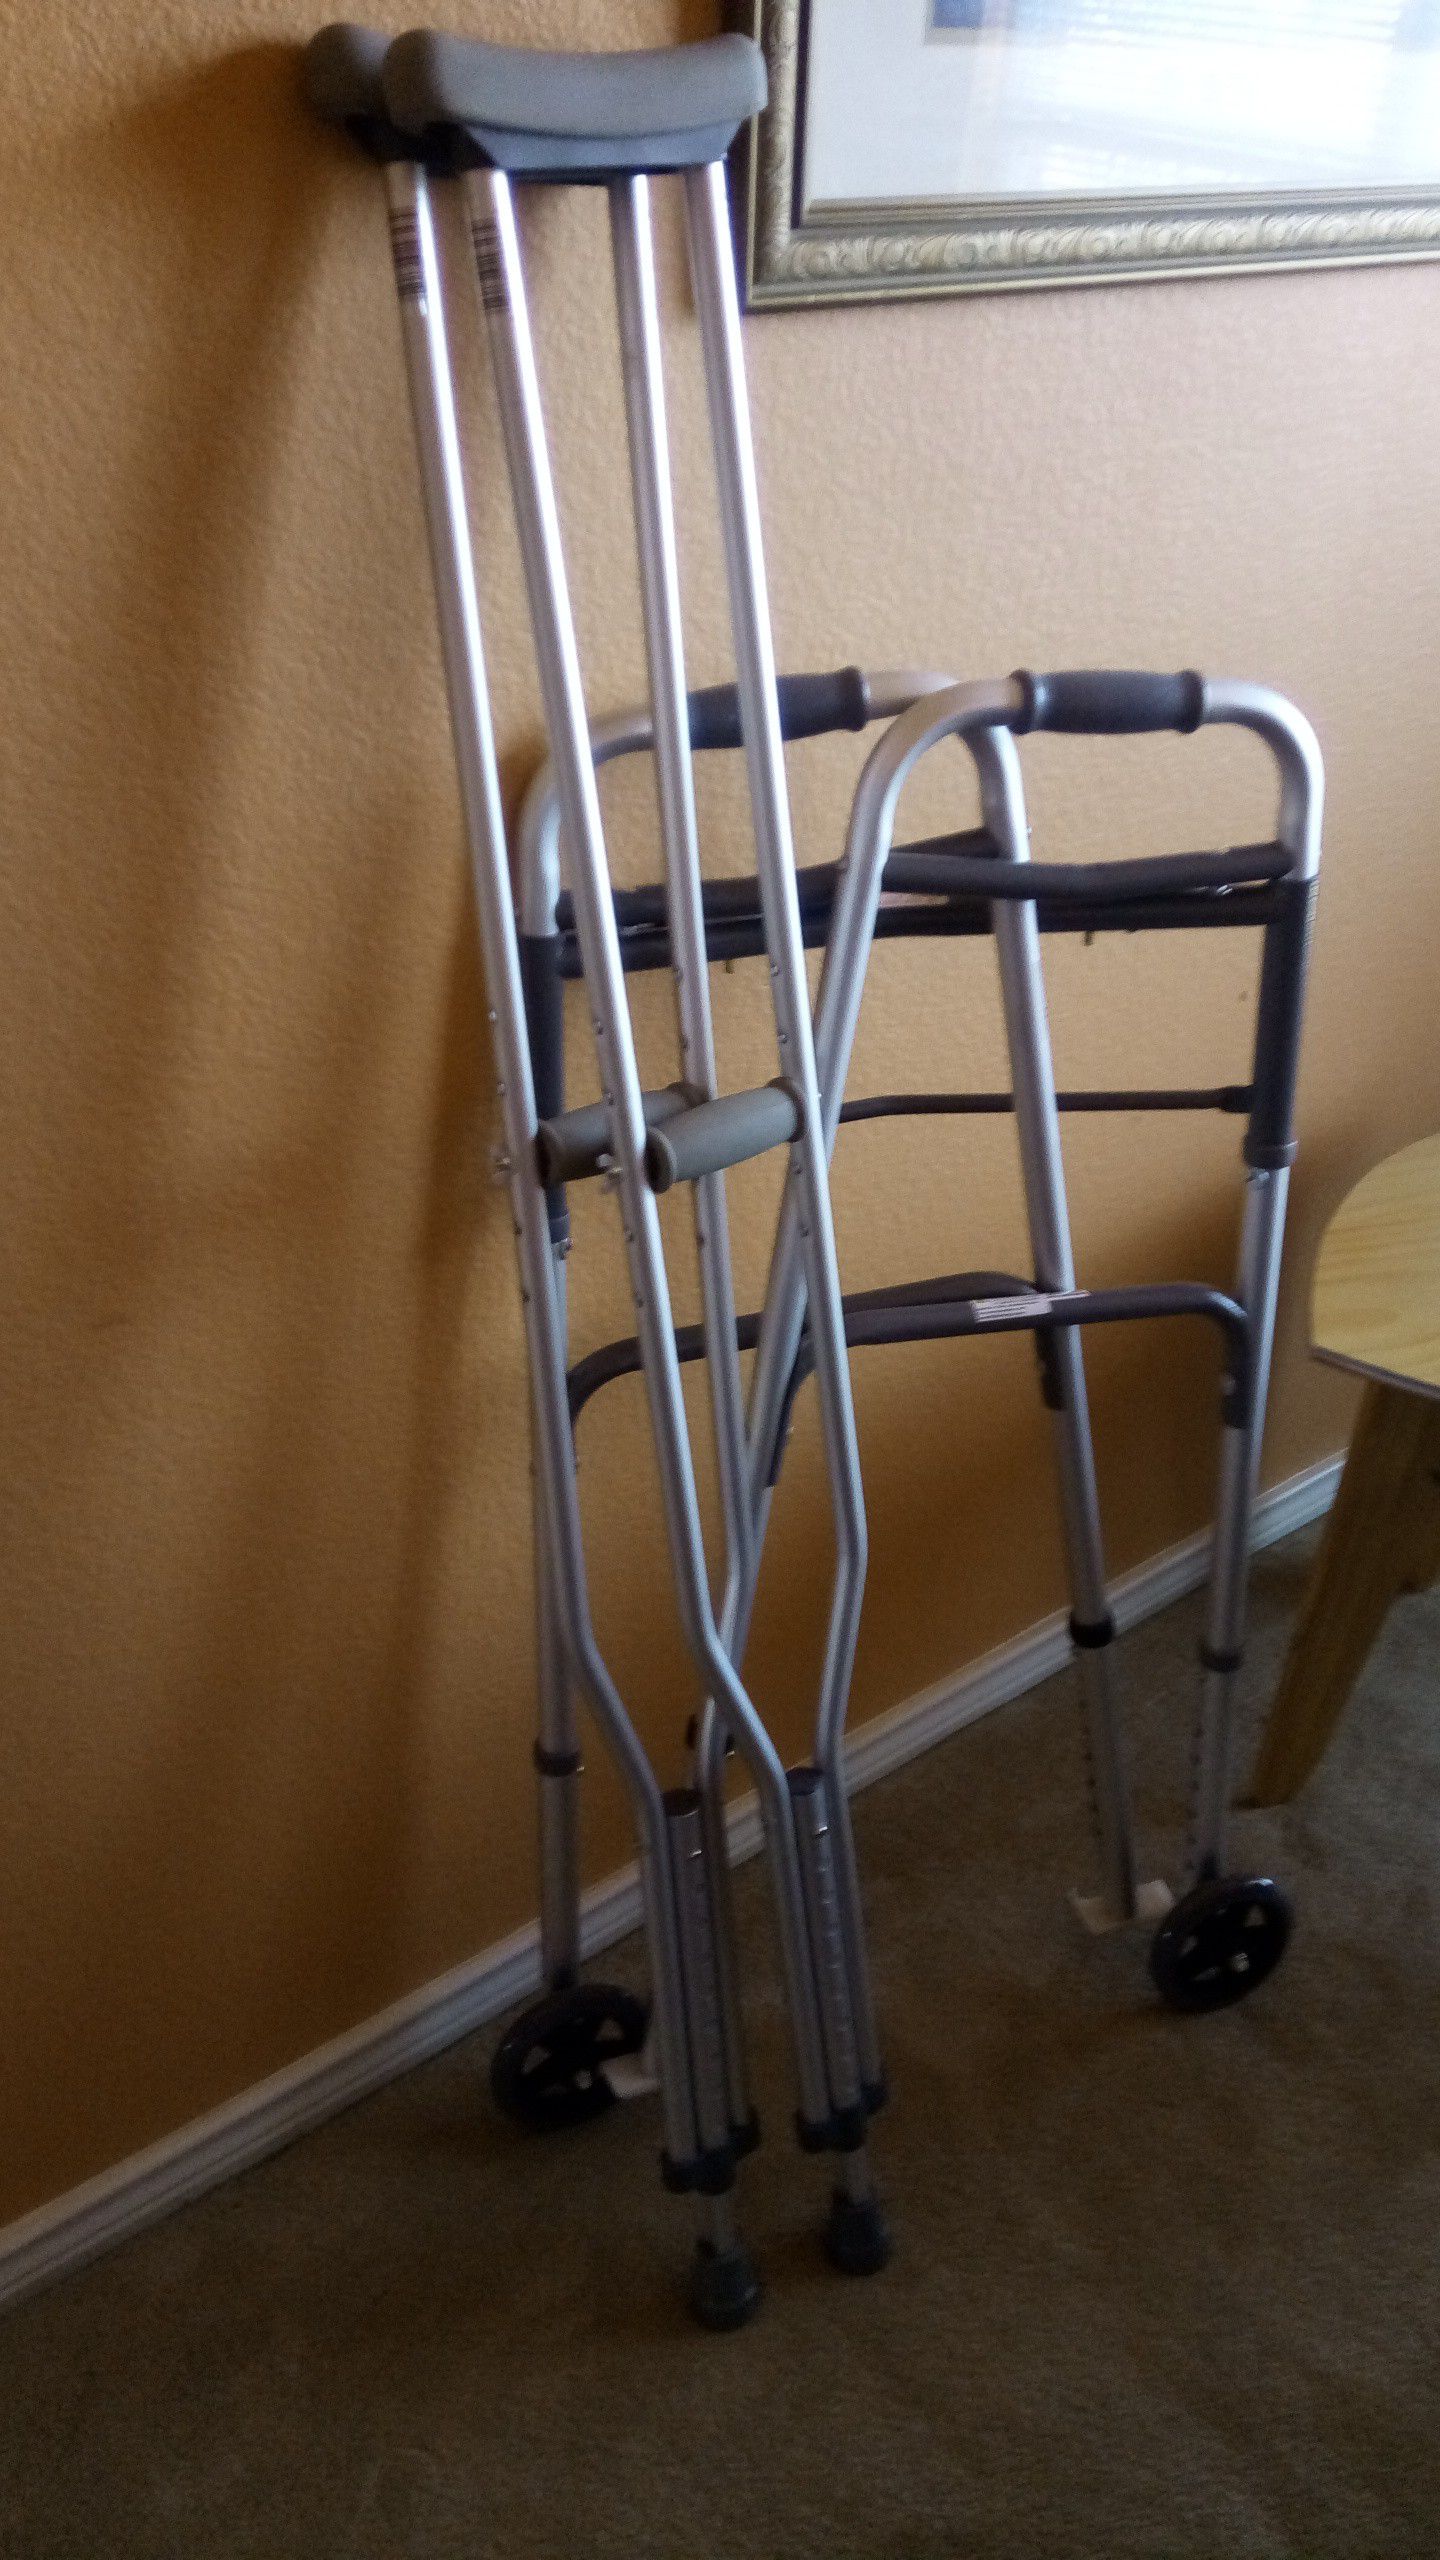 Walker with glides and crutches. Height adjustable